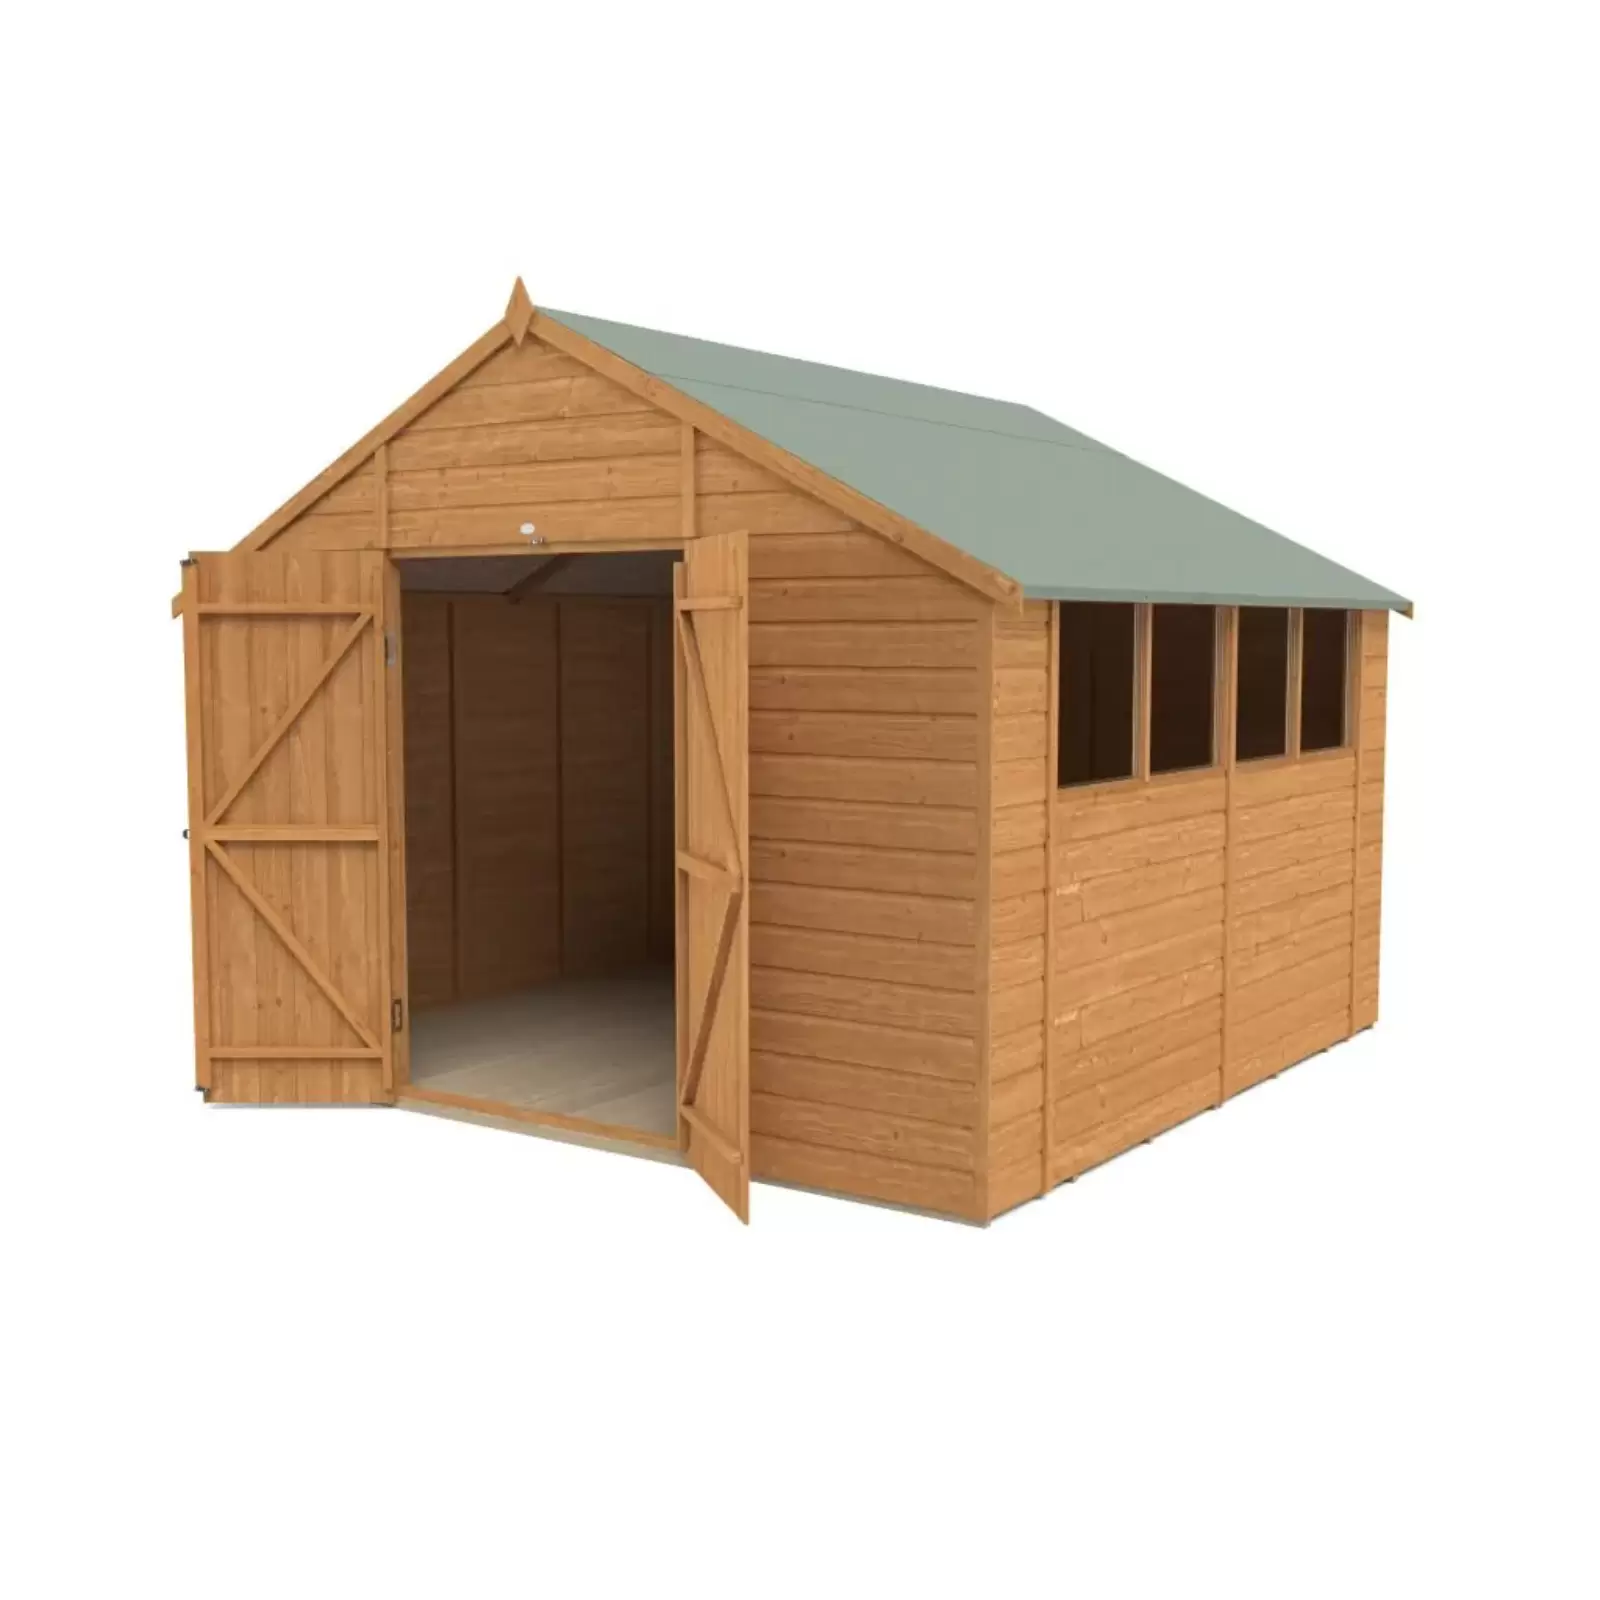 Forest Garden DTS Shiplap Dip Treated 10x10 Apex Shed - Double Door 